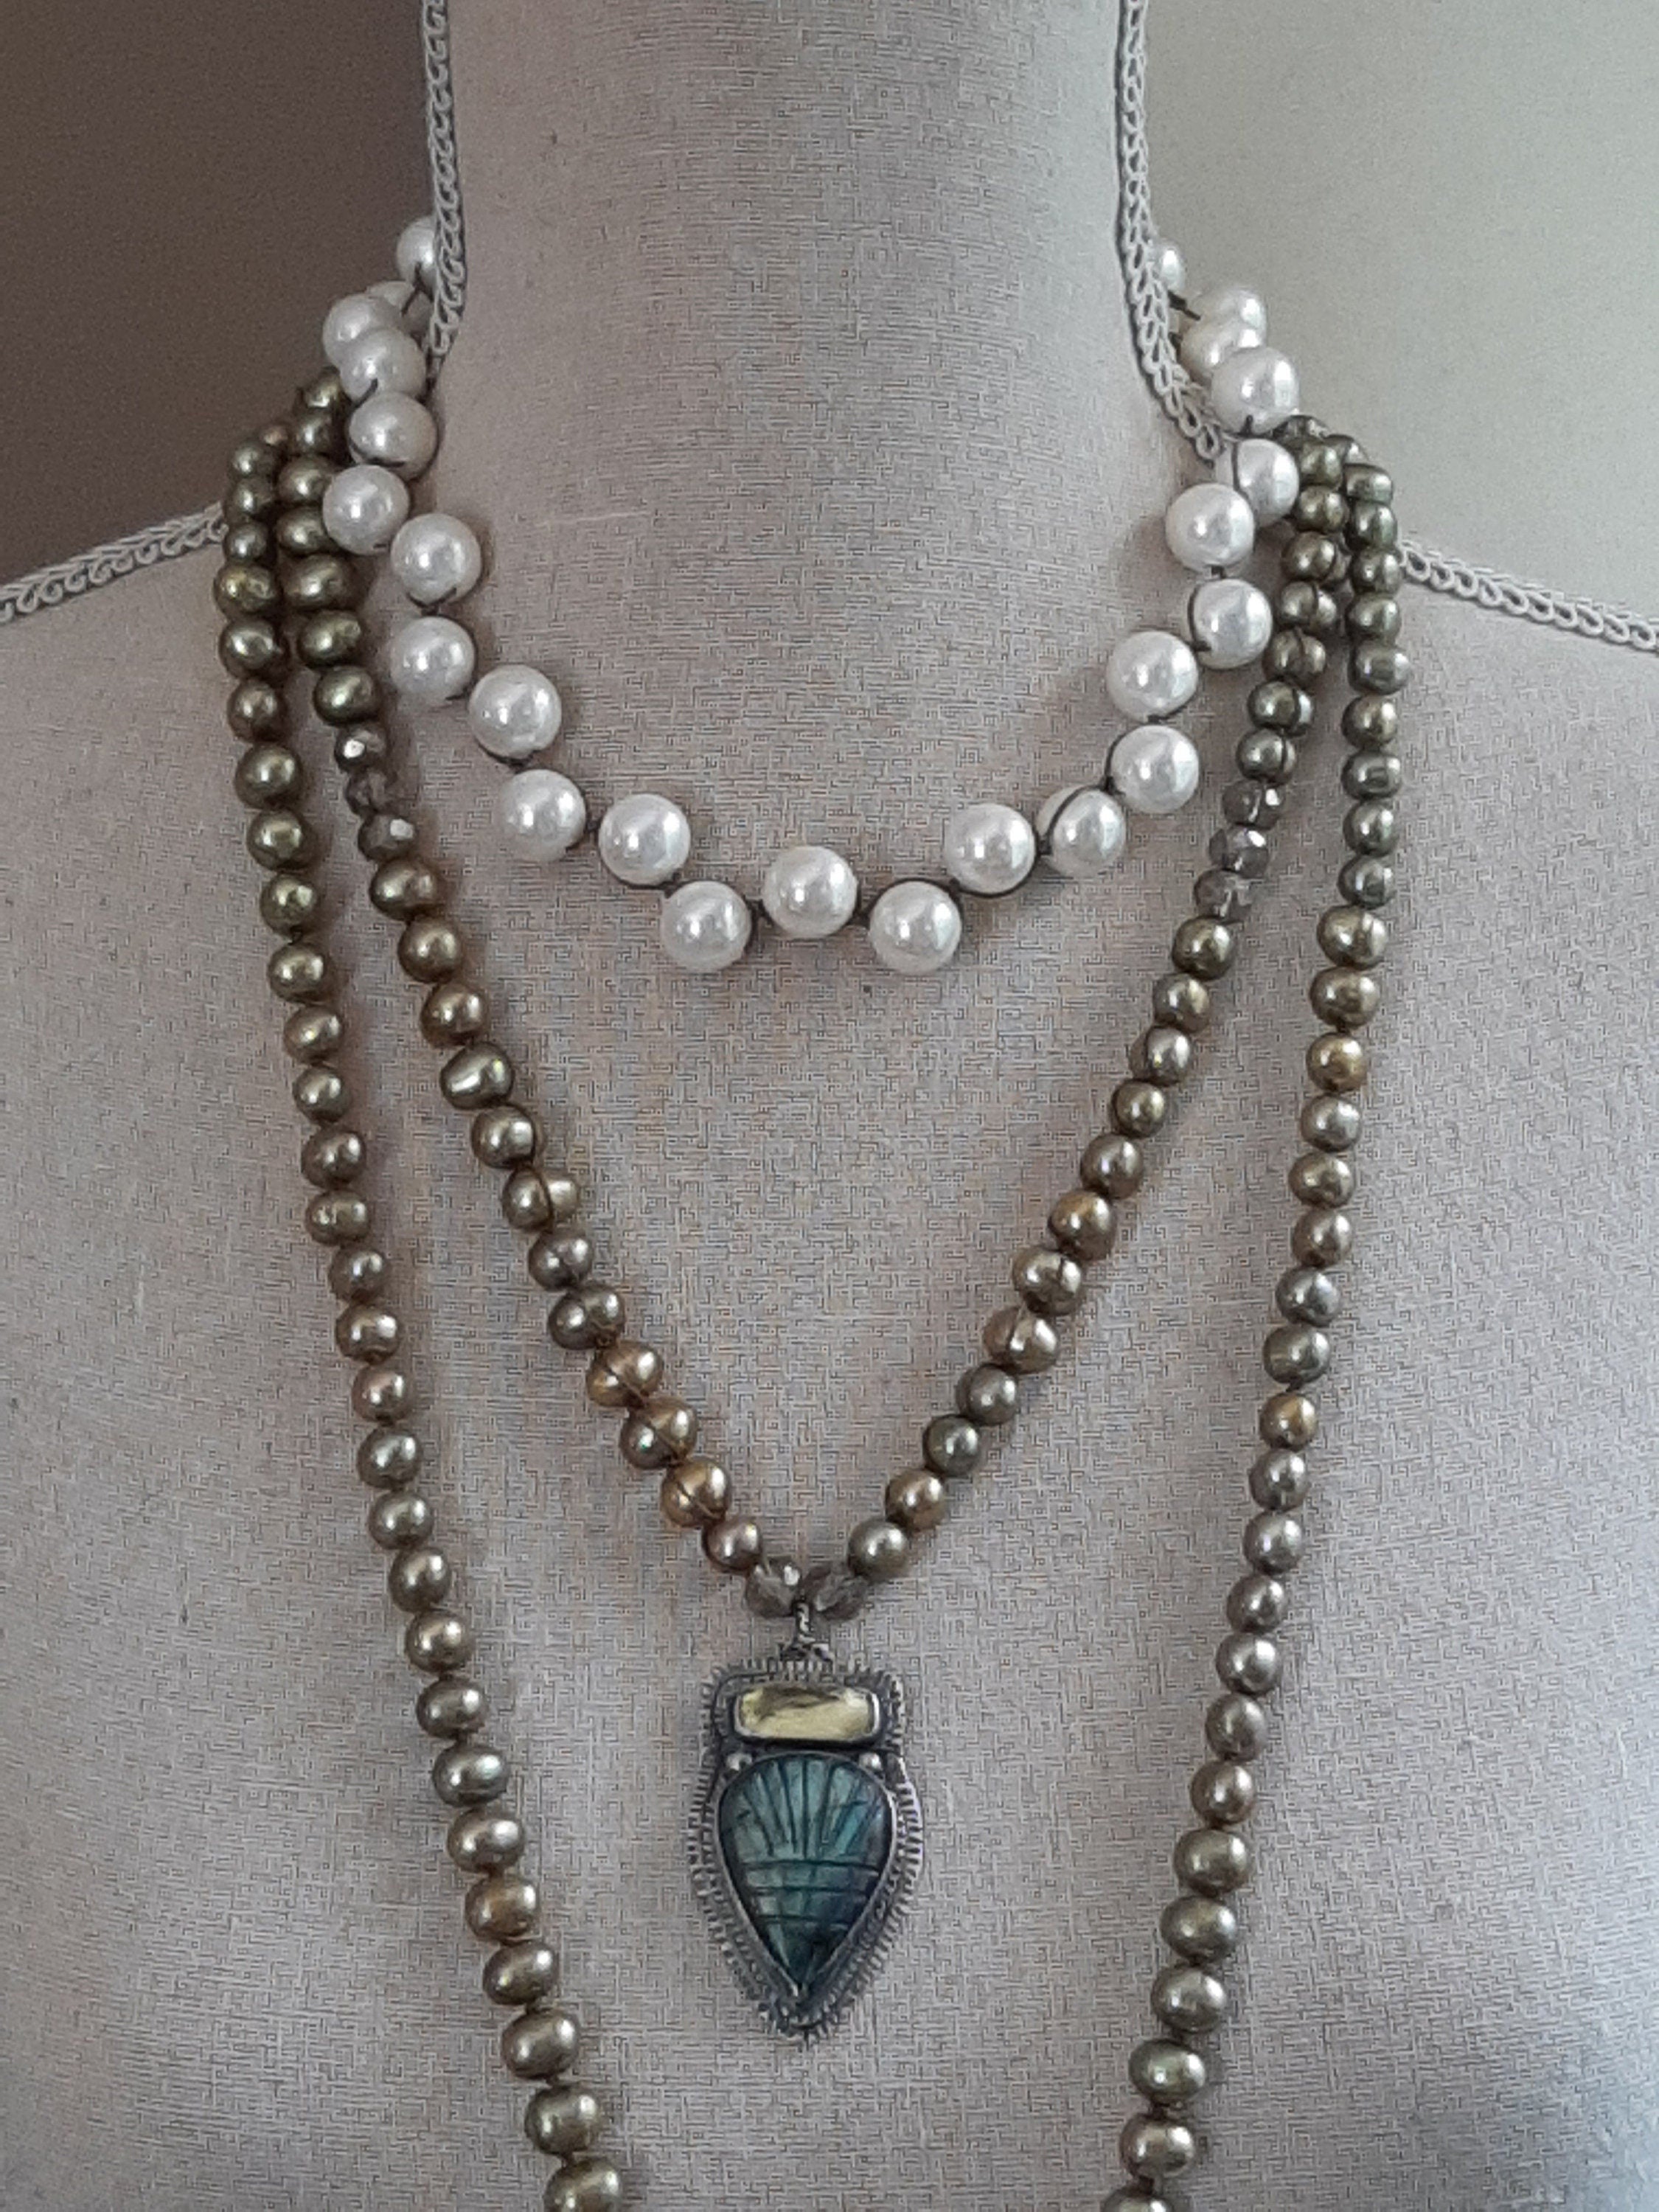 Knotted pearl necklace with white pearls 